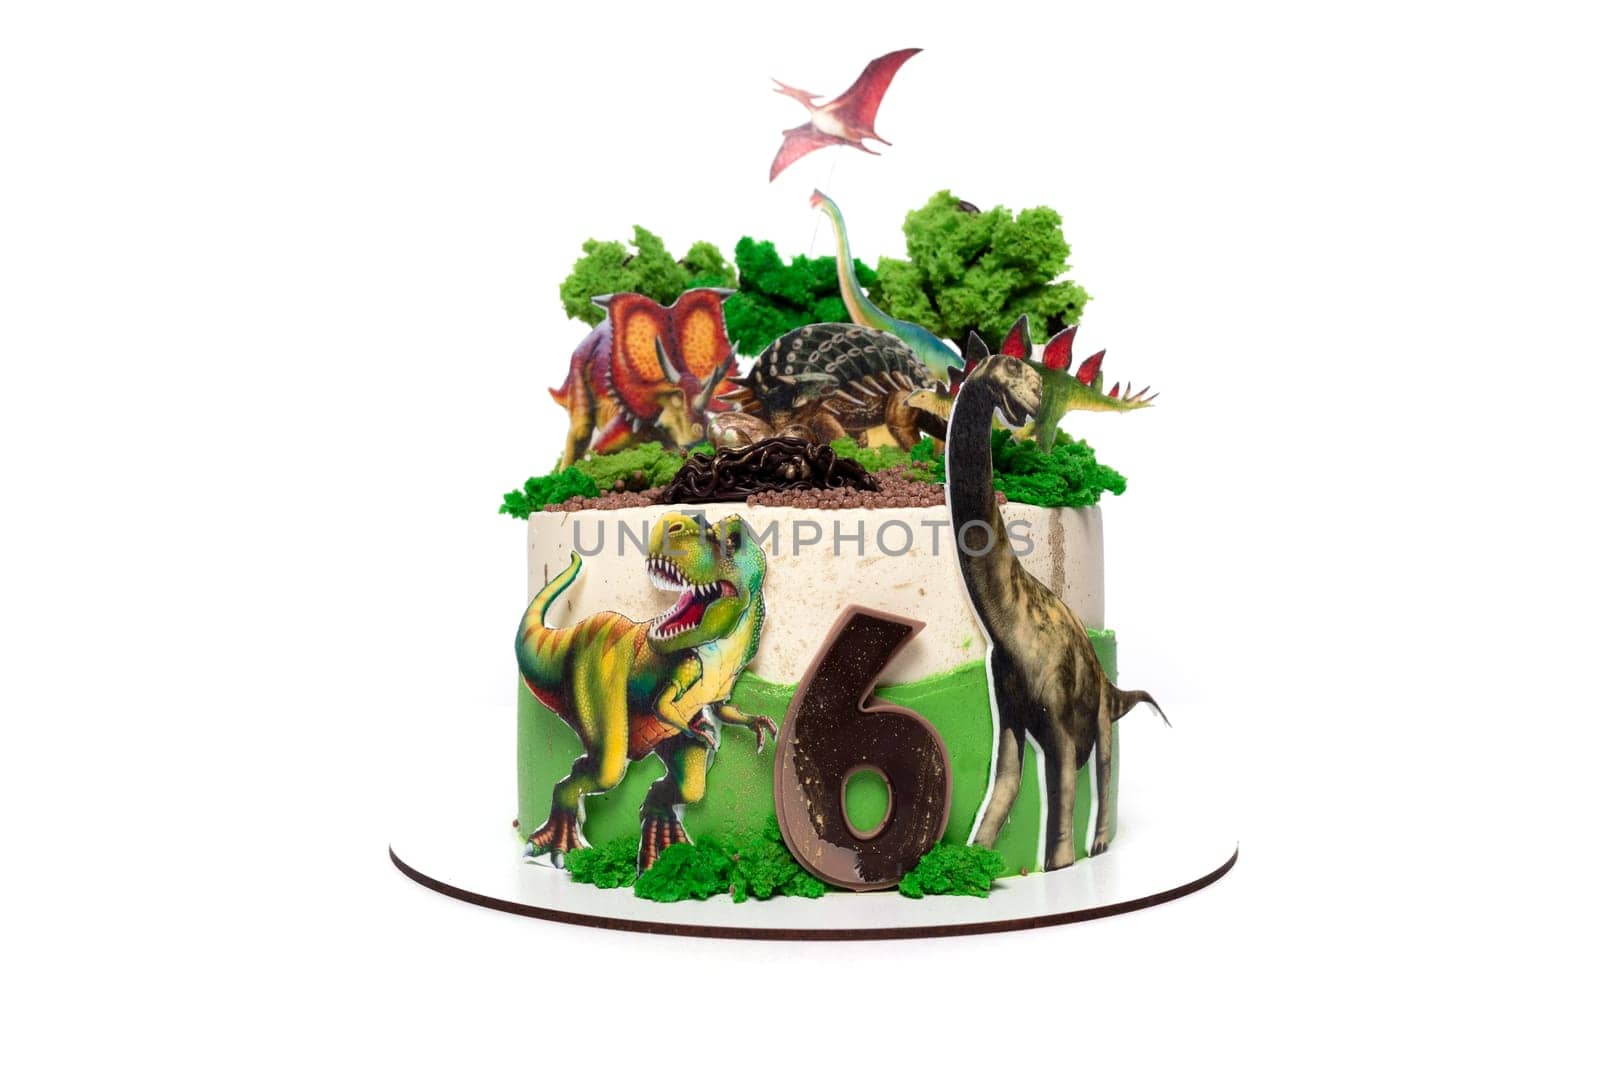 A birthday cake adorned with edible dinosaurs and plant decorations, perfect for a dinosaur-themed celebration. The cake features intricate details of different dinosaur species and lush green plant elements, creating a unique and fun design for the occasion.